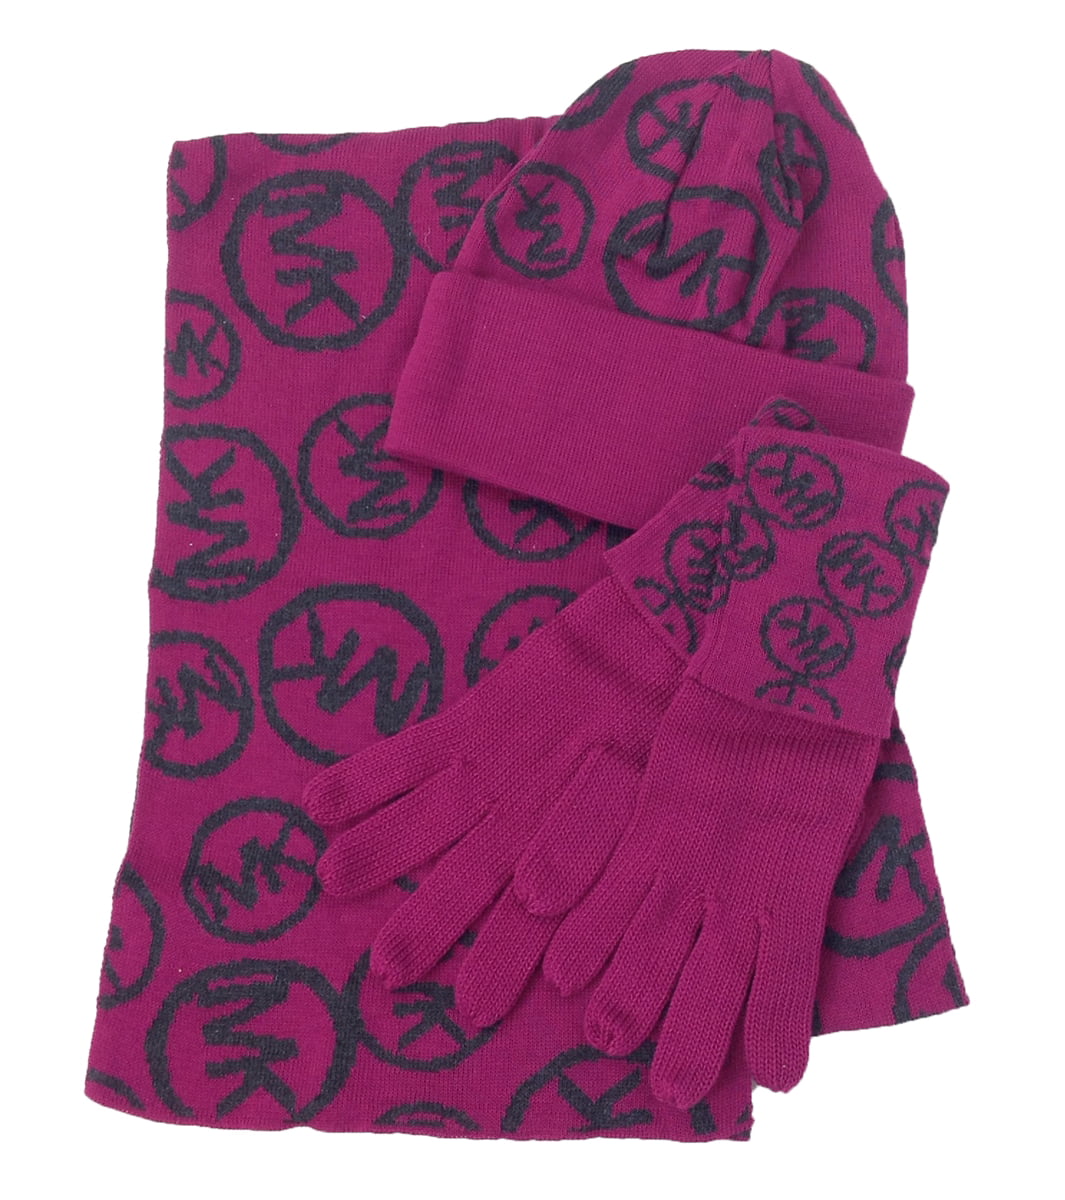 mk gloves and scarf